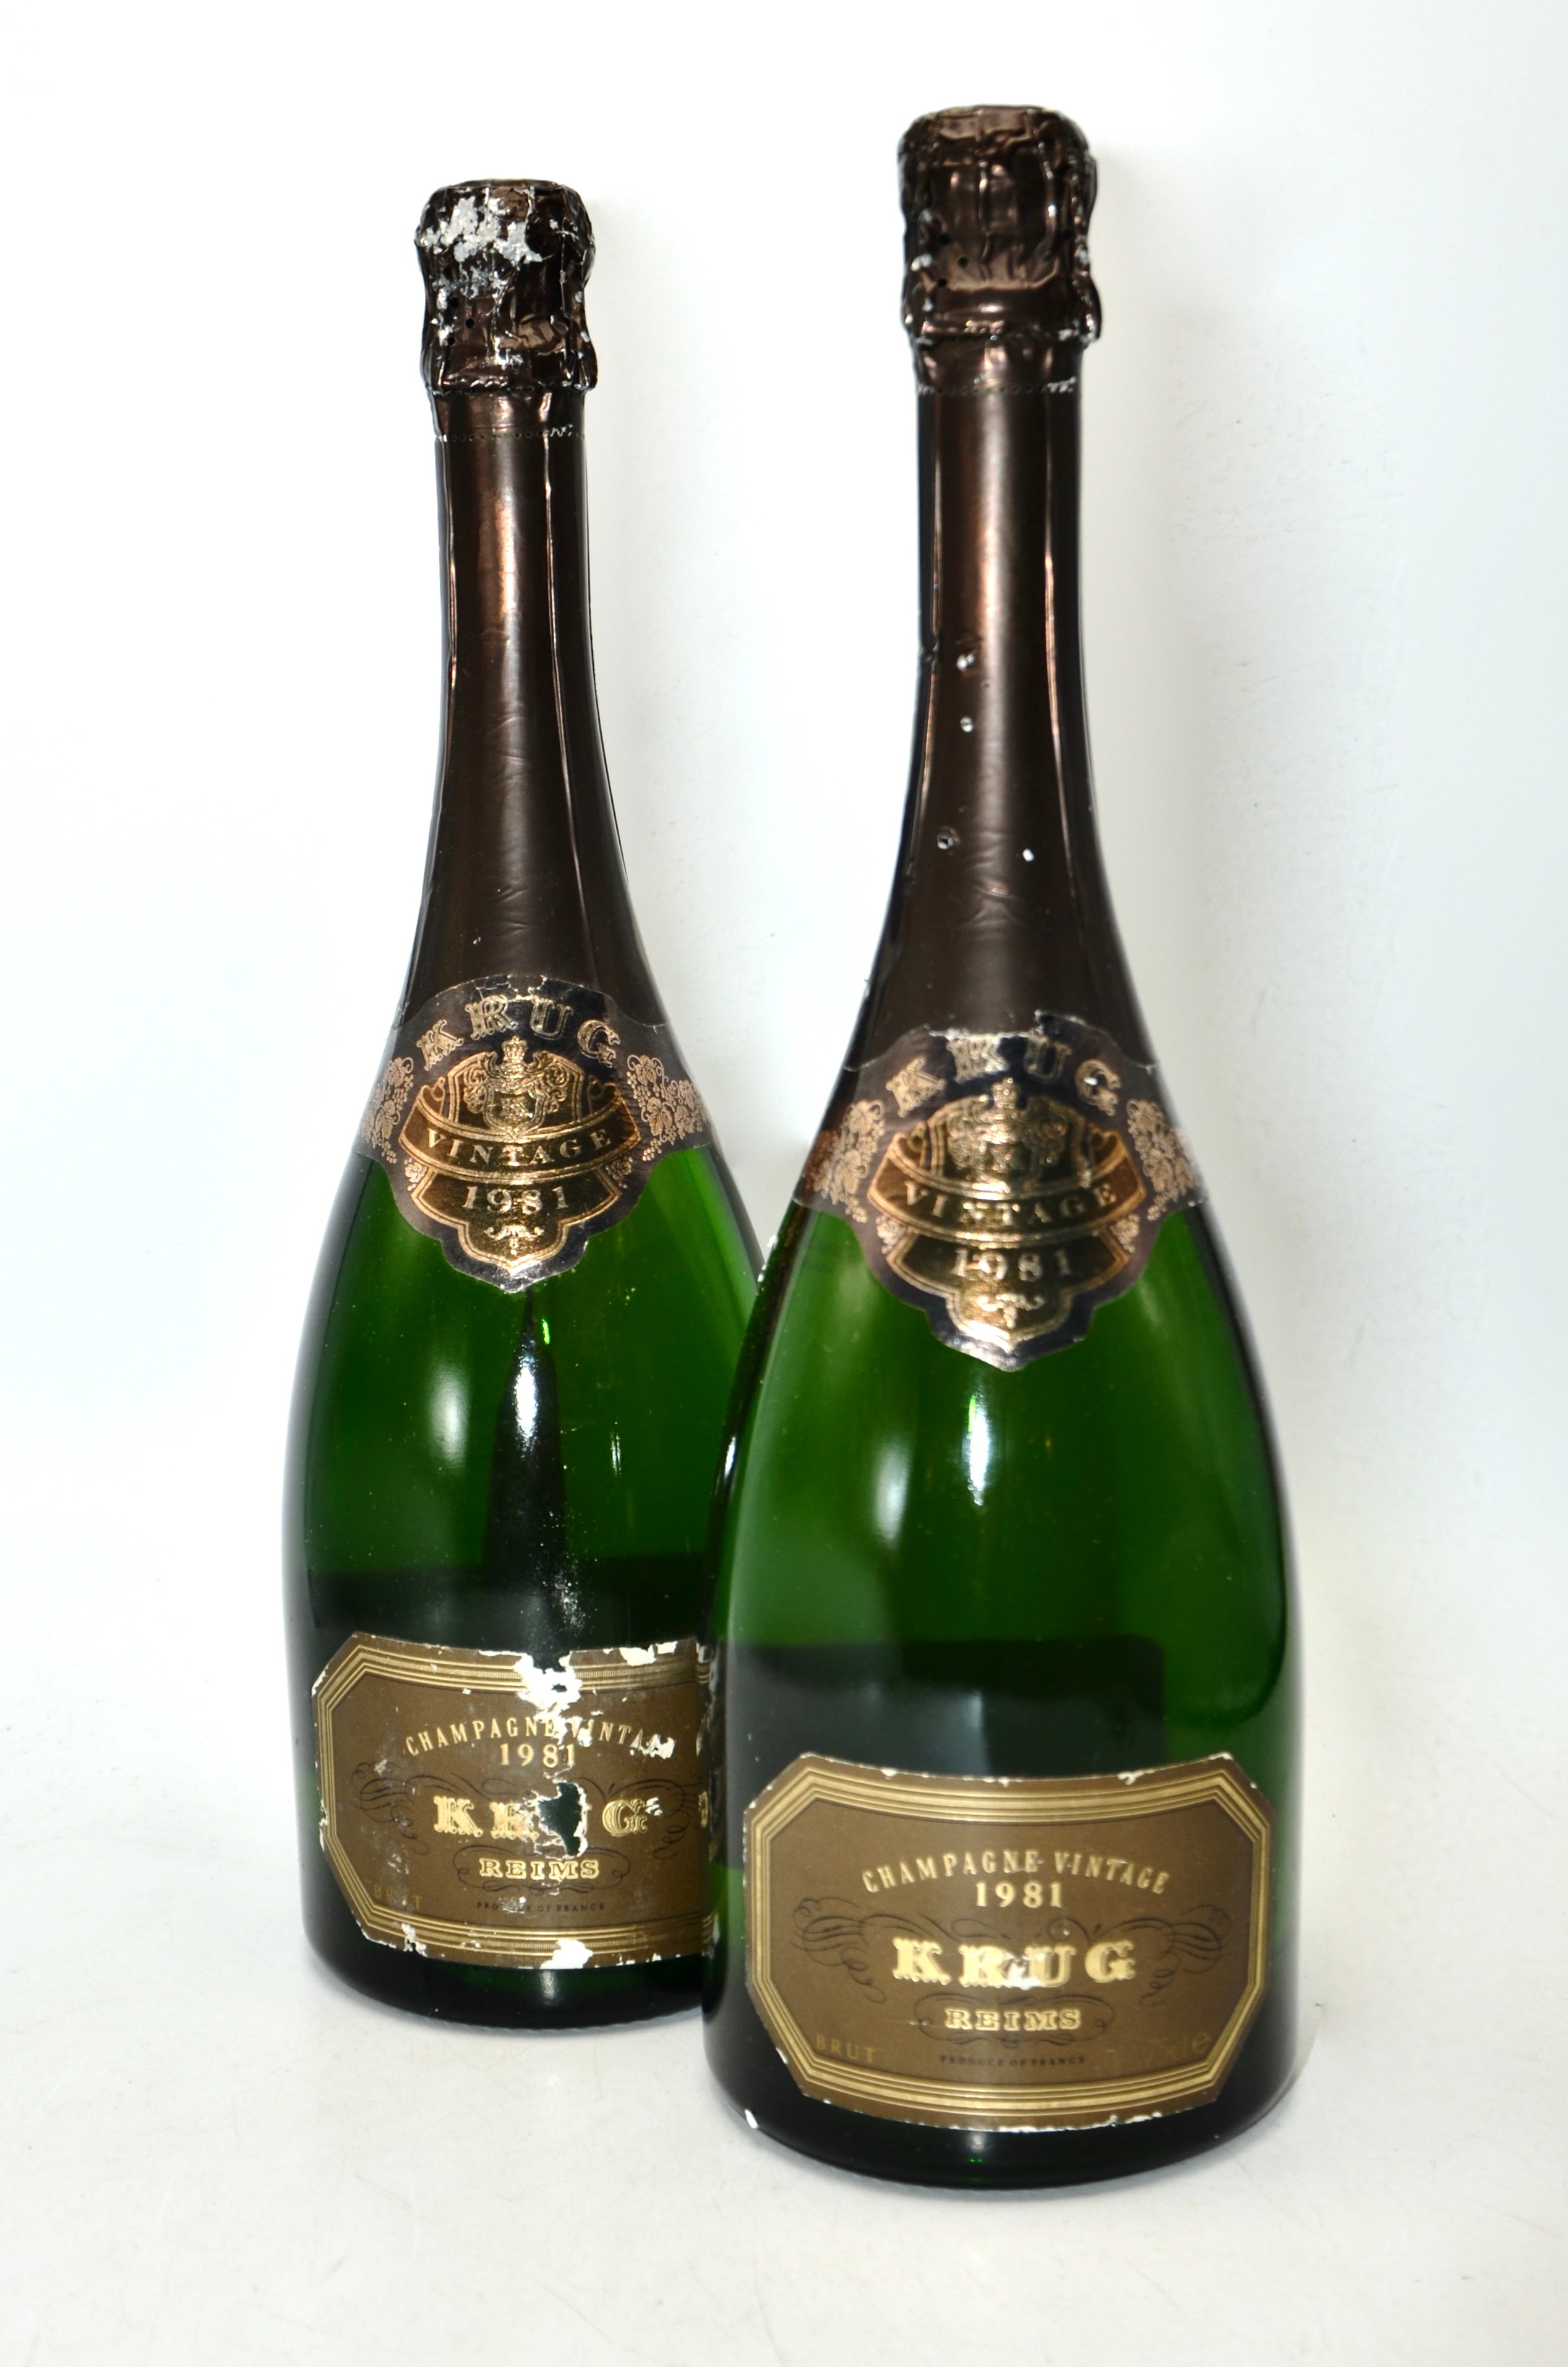 Krug Products